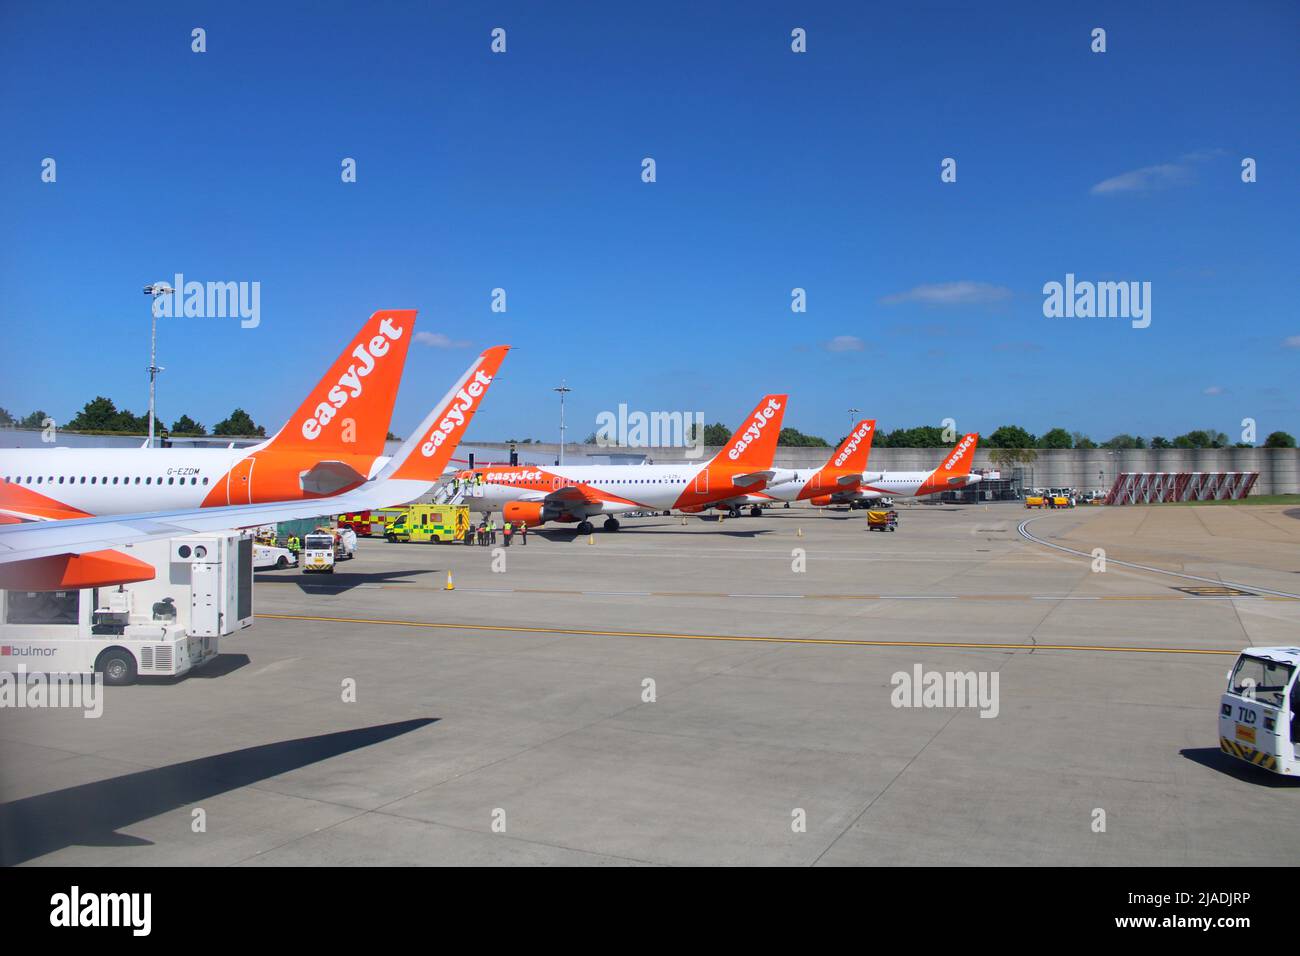 Easyjet flights grounded at London Gatwick Airport Stock Photo